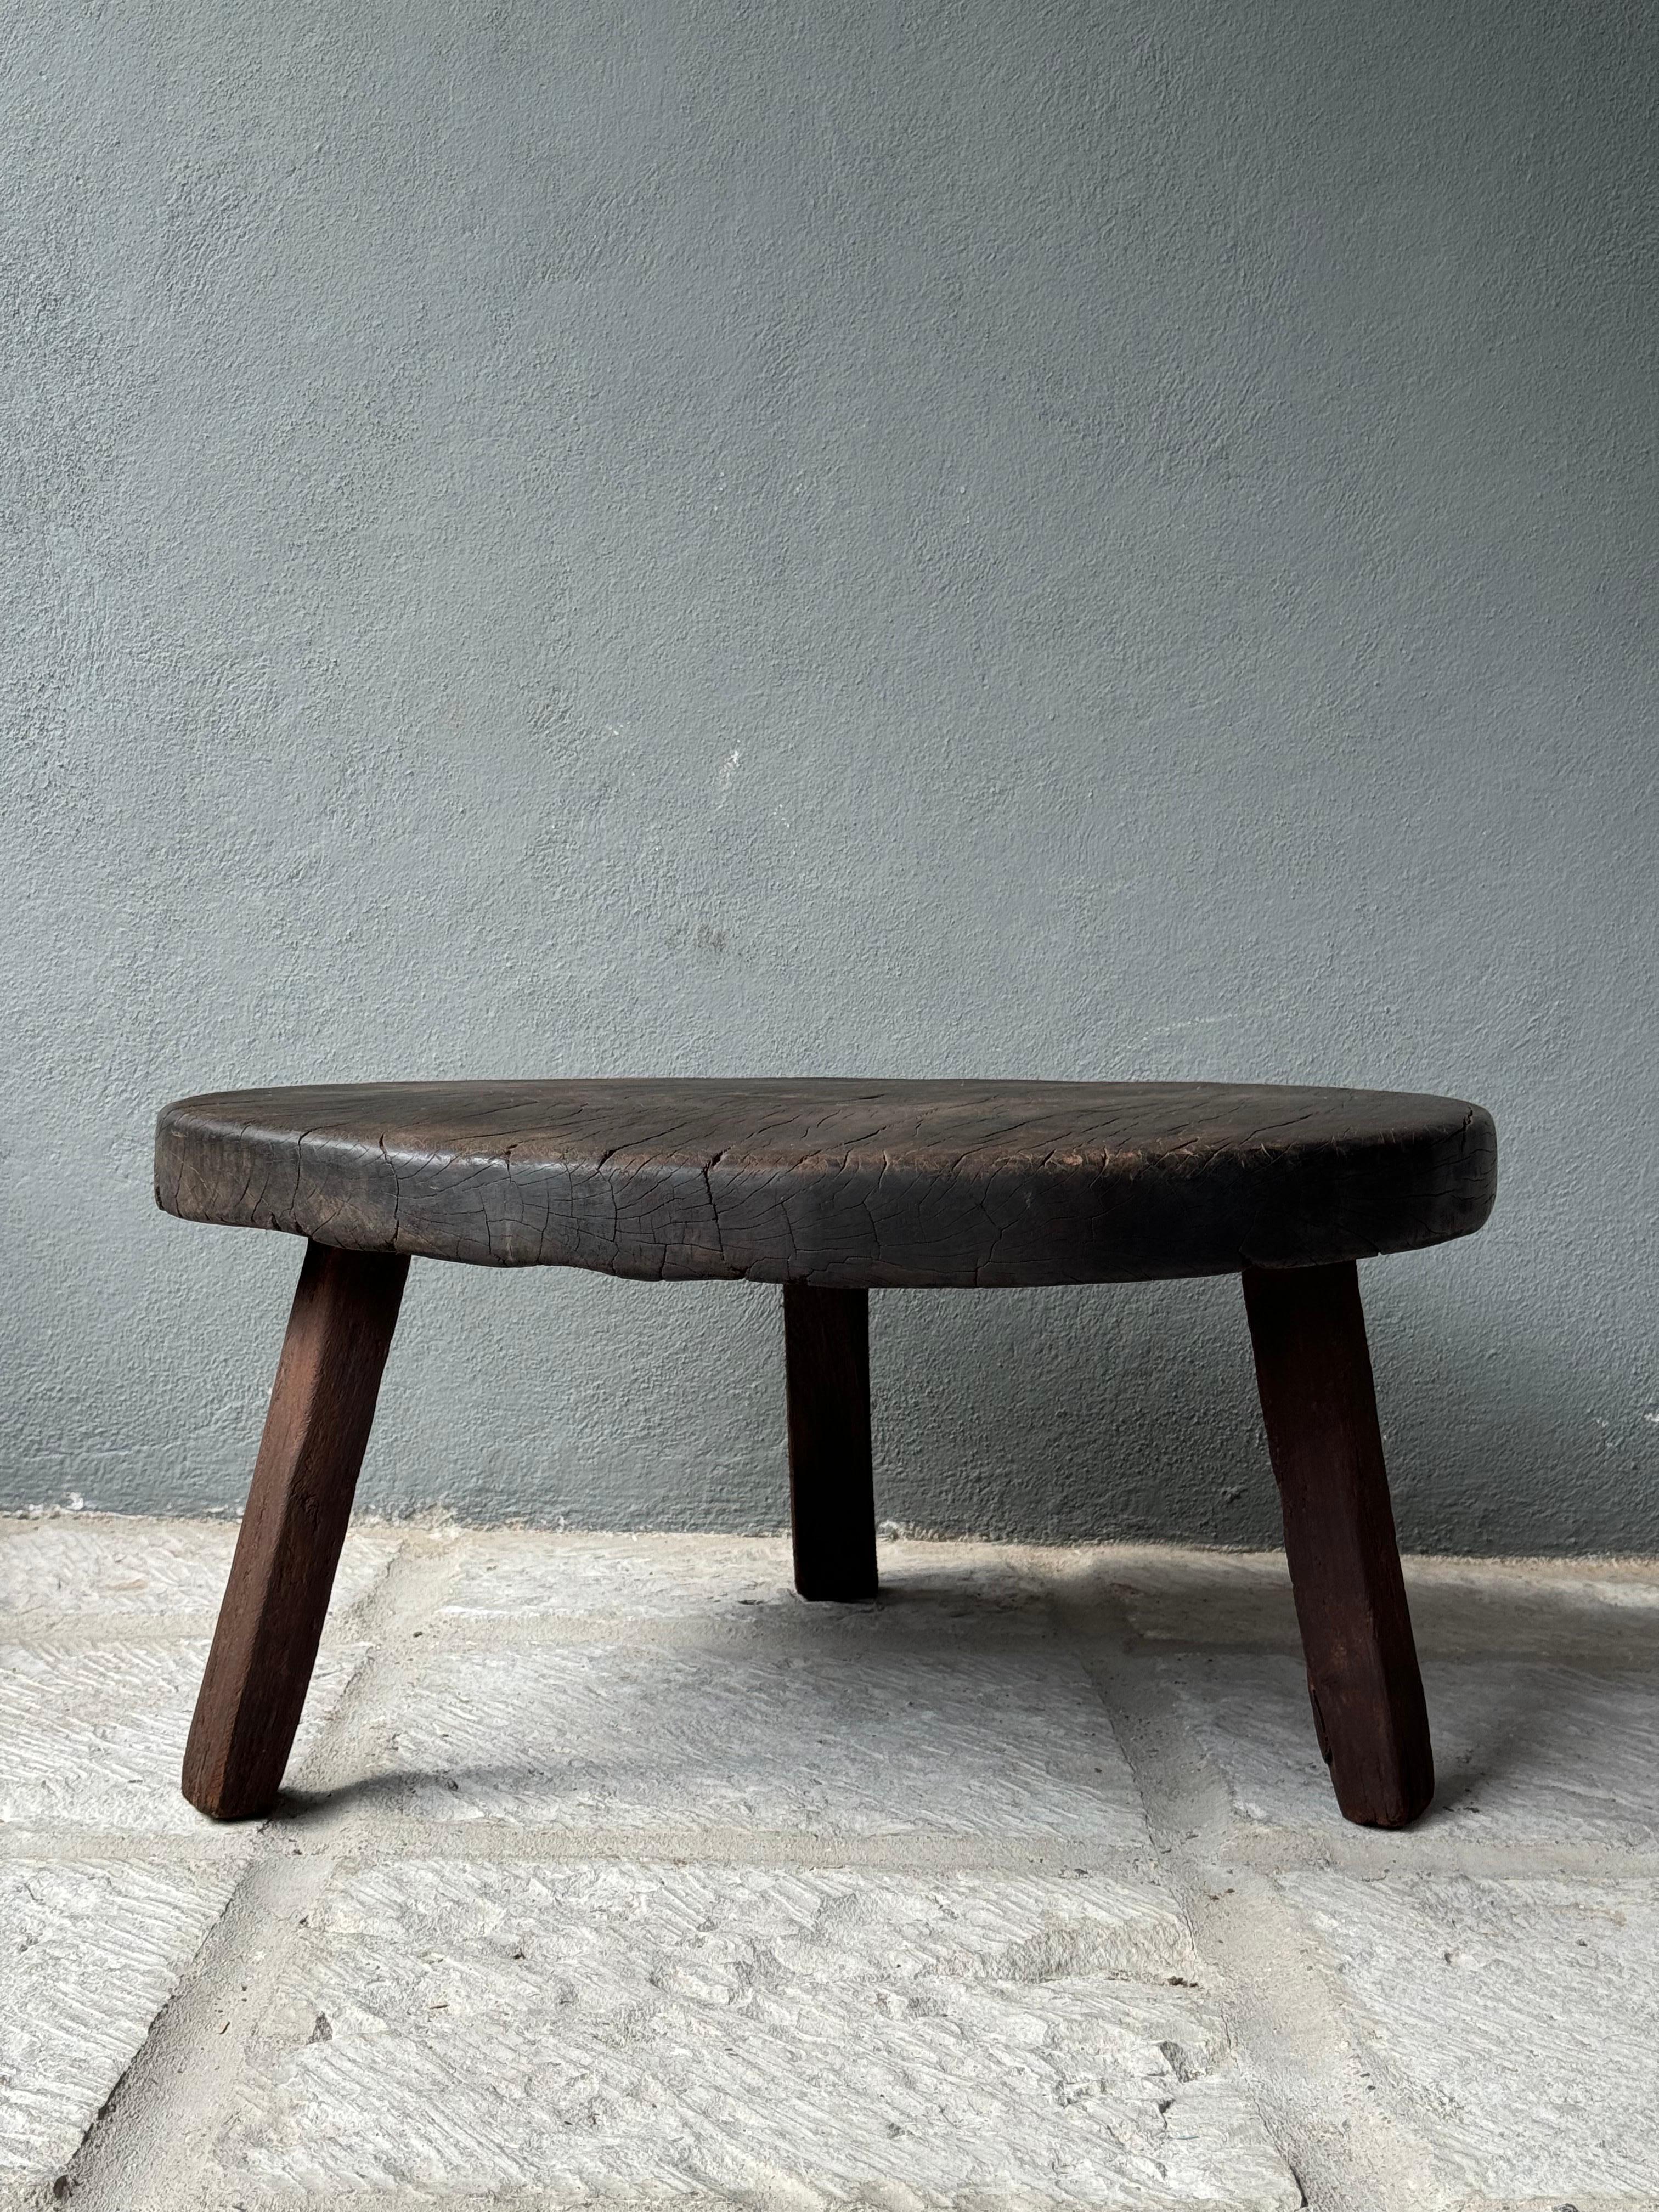 Primitive hardwood round table from the Central Yucatan area, Mexico, mid-to-late 1900´s. Excellent wear and color on the table top surface. These tables were hand-carved in the tropical rainforest using heavy machetes and perfected by way of sharp